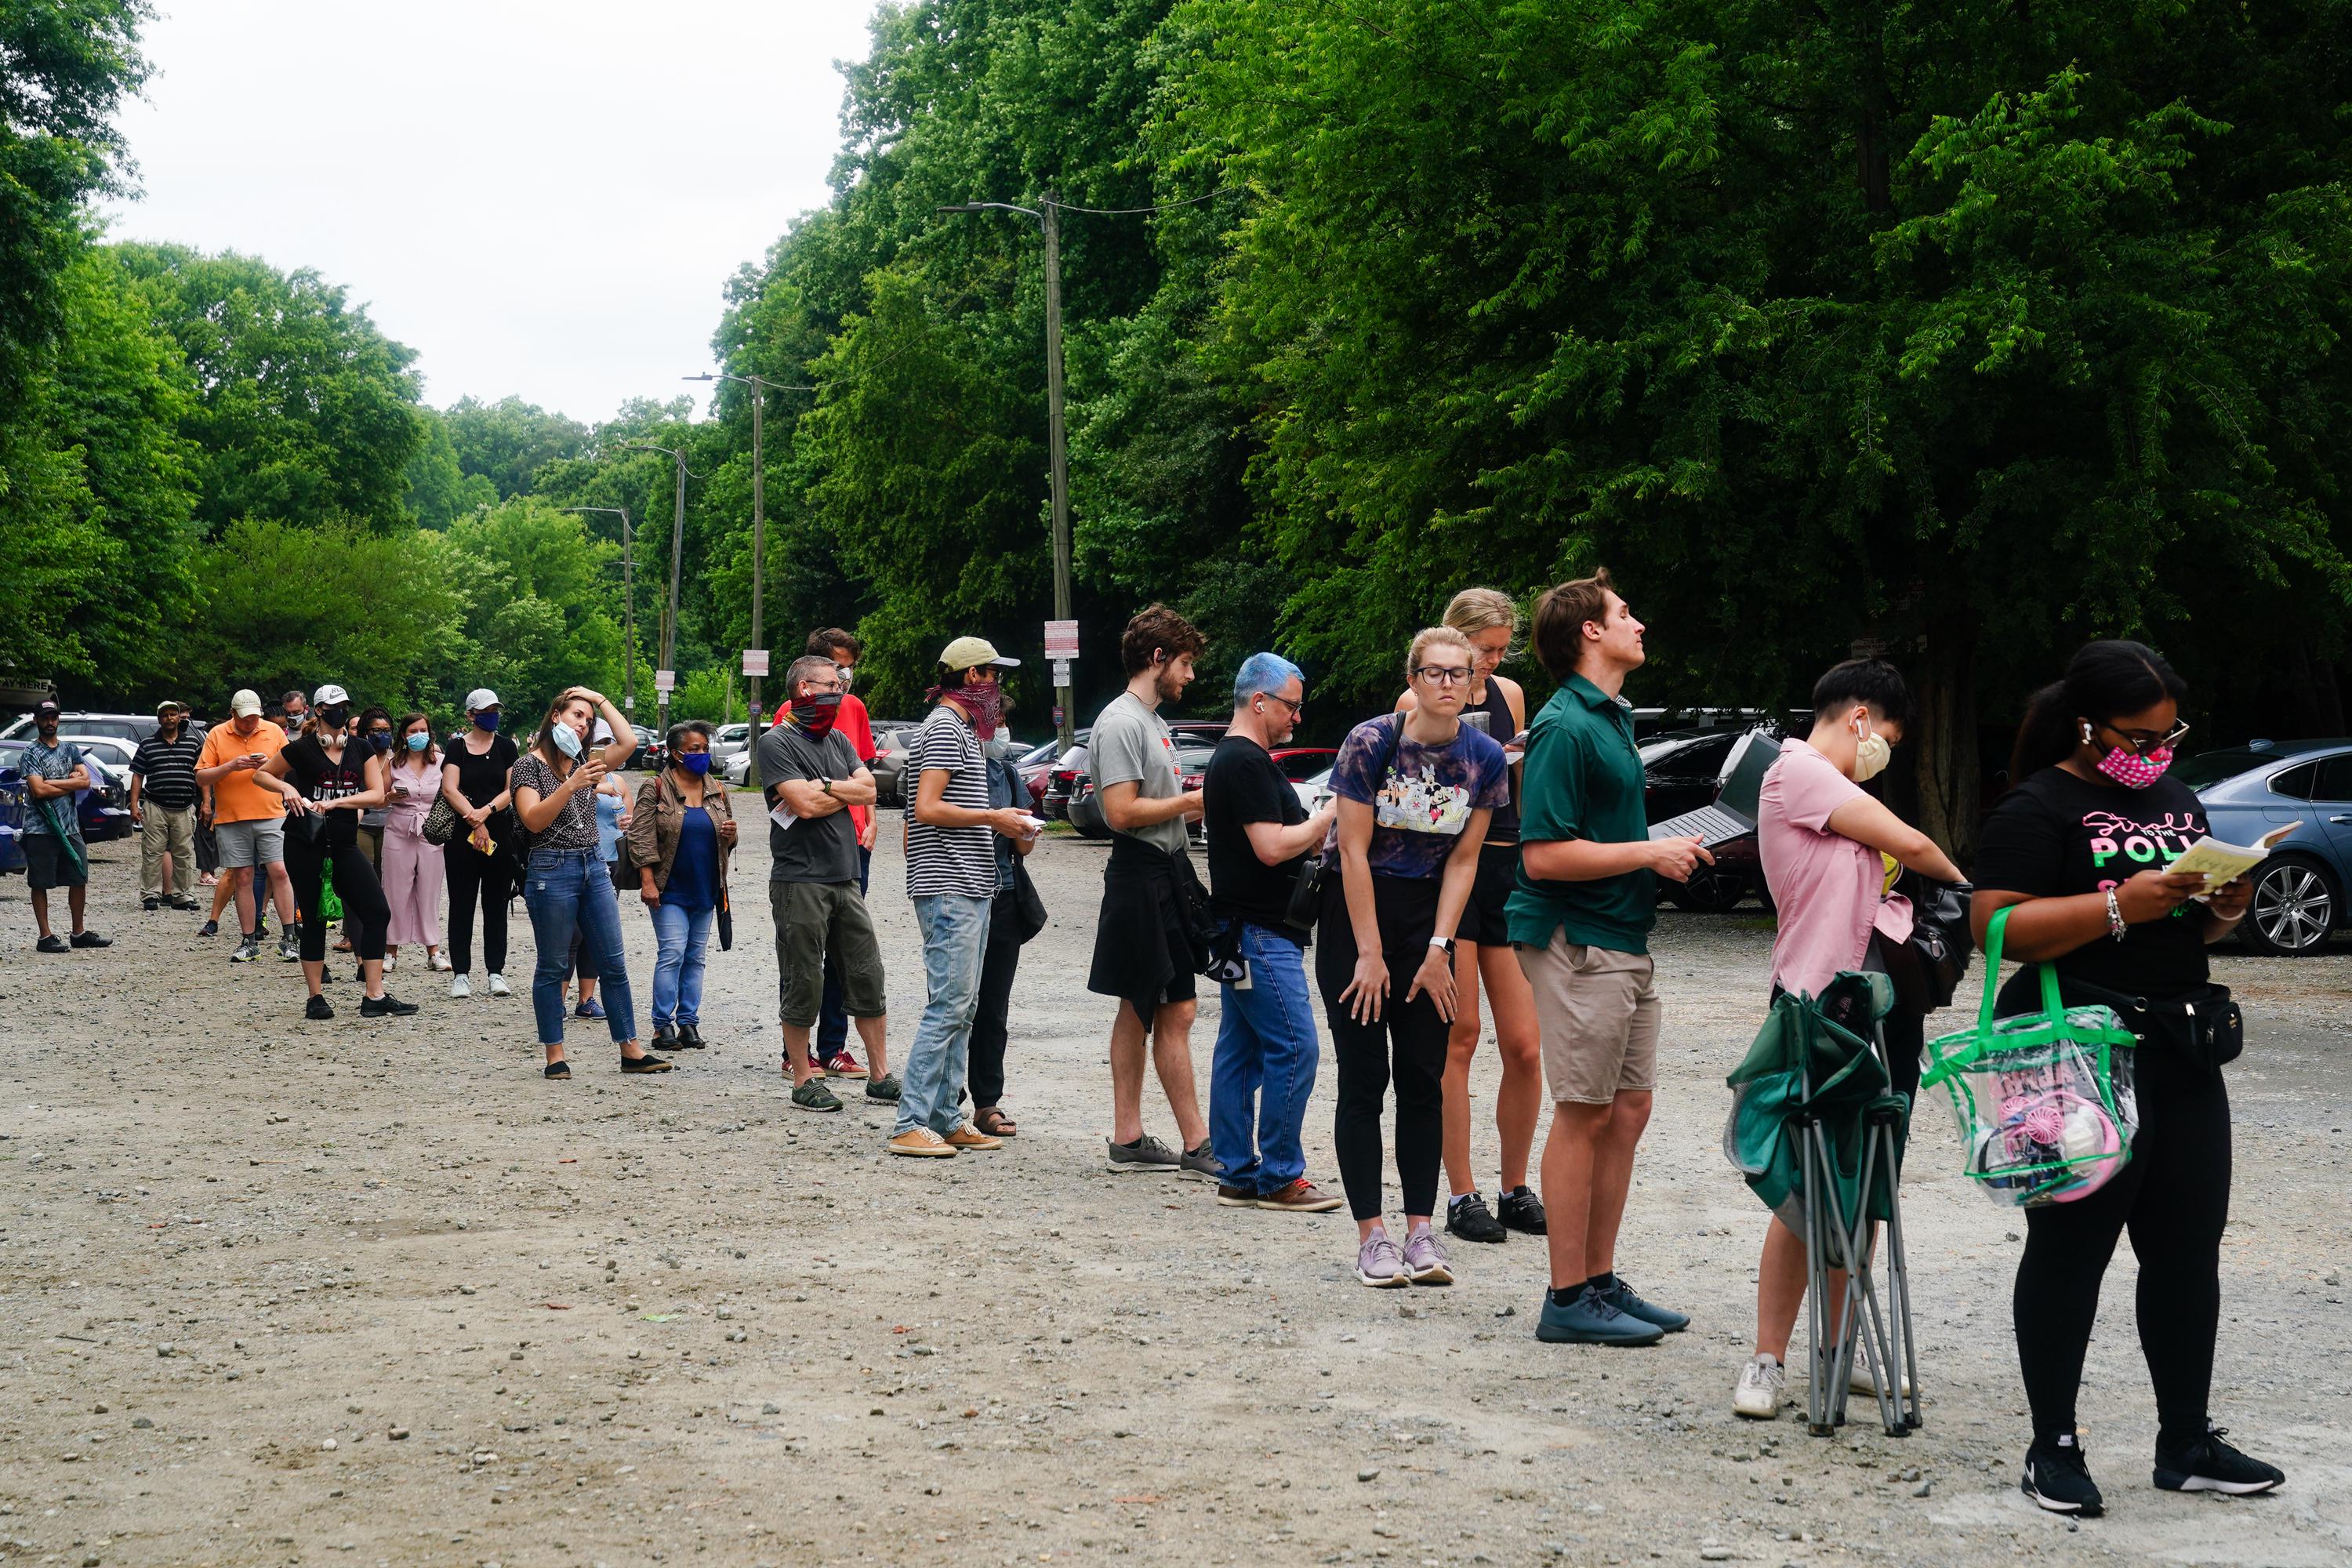 A long line of people standing in a parking lot, with trees in the background